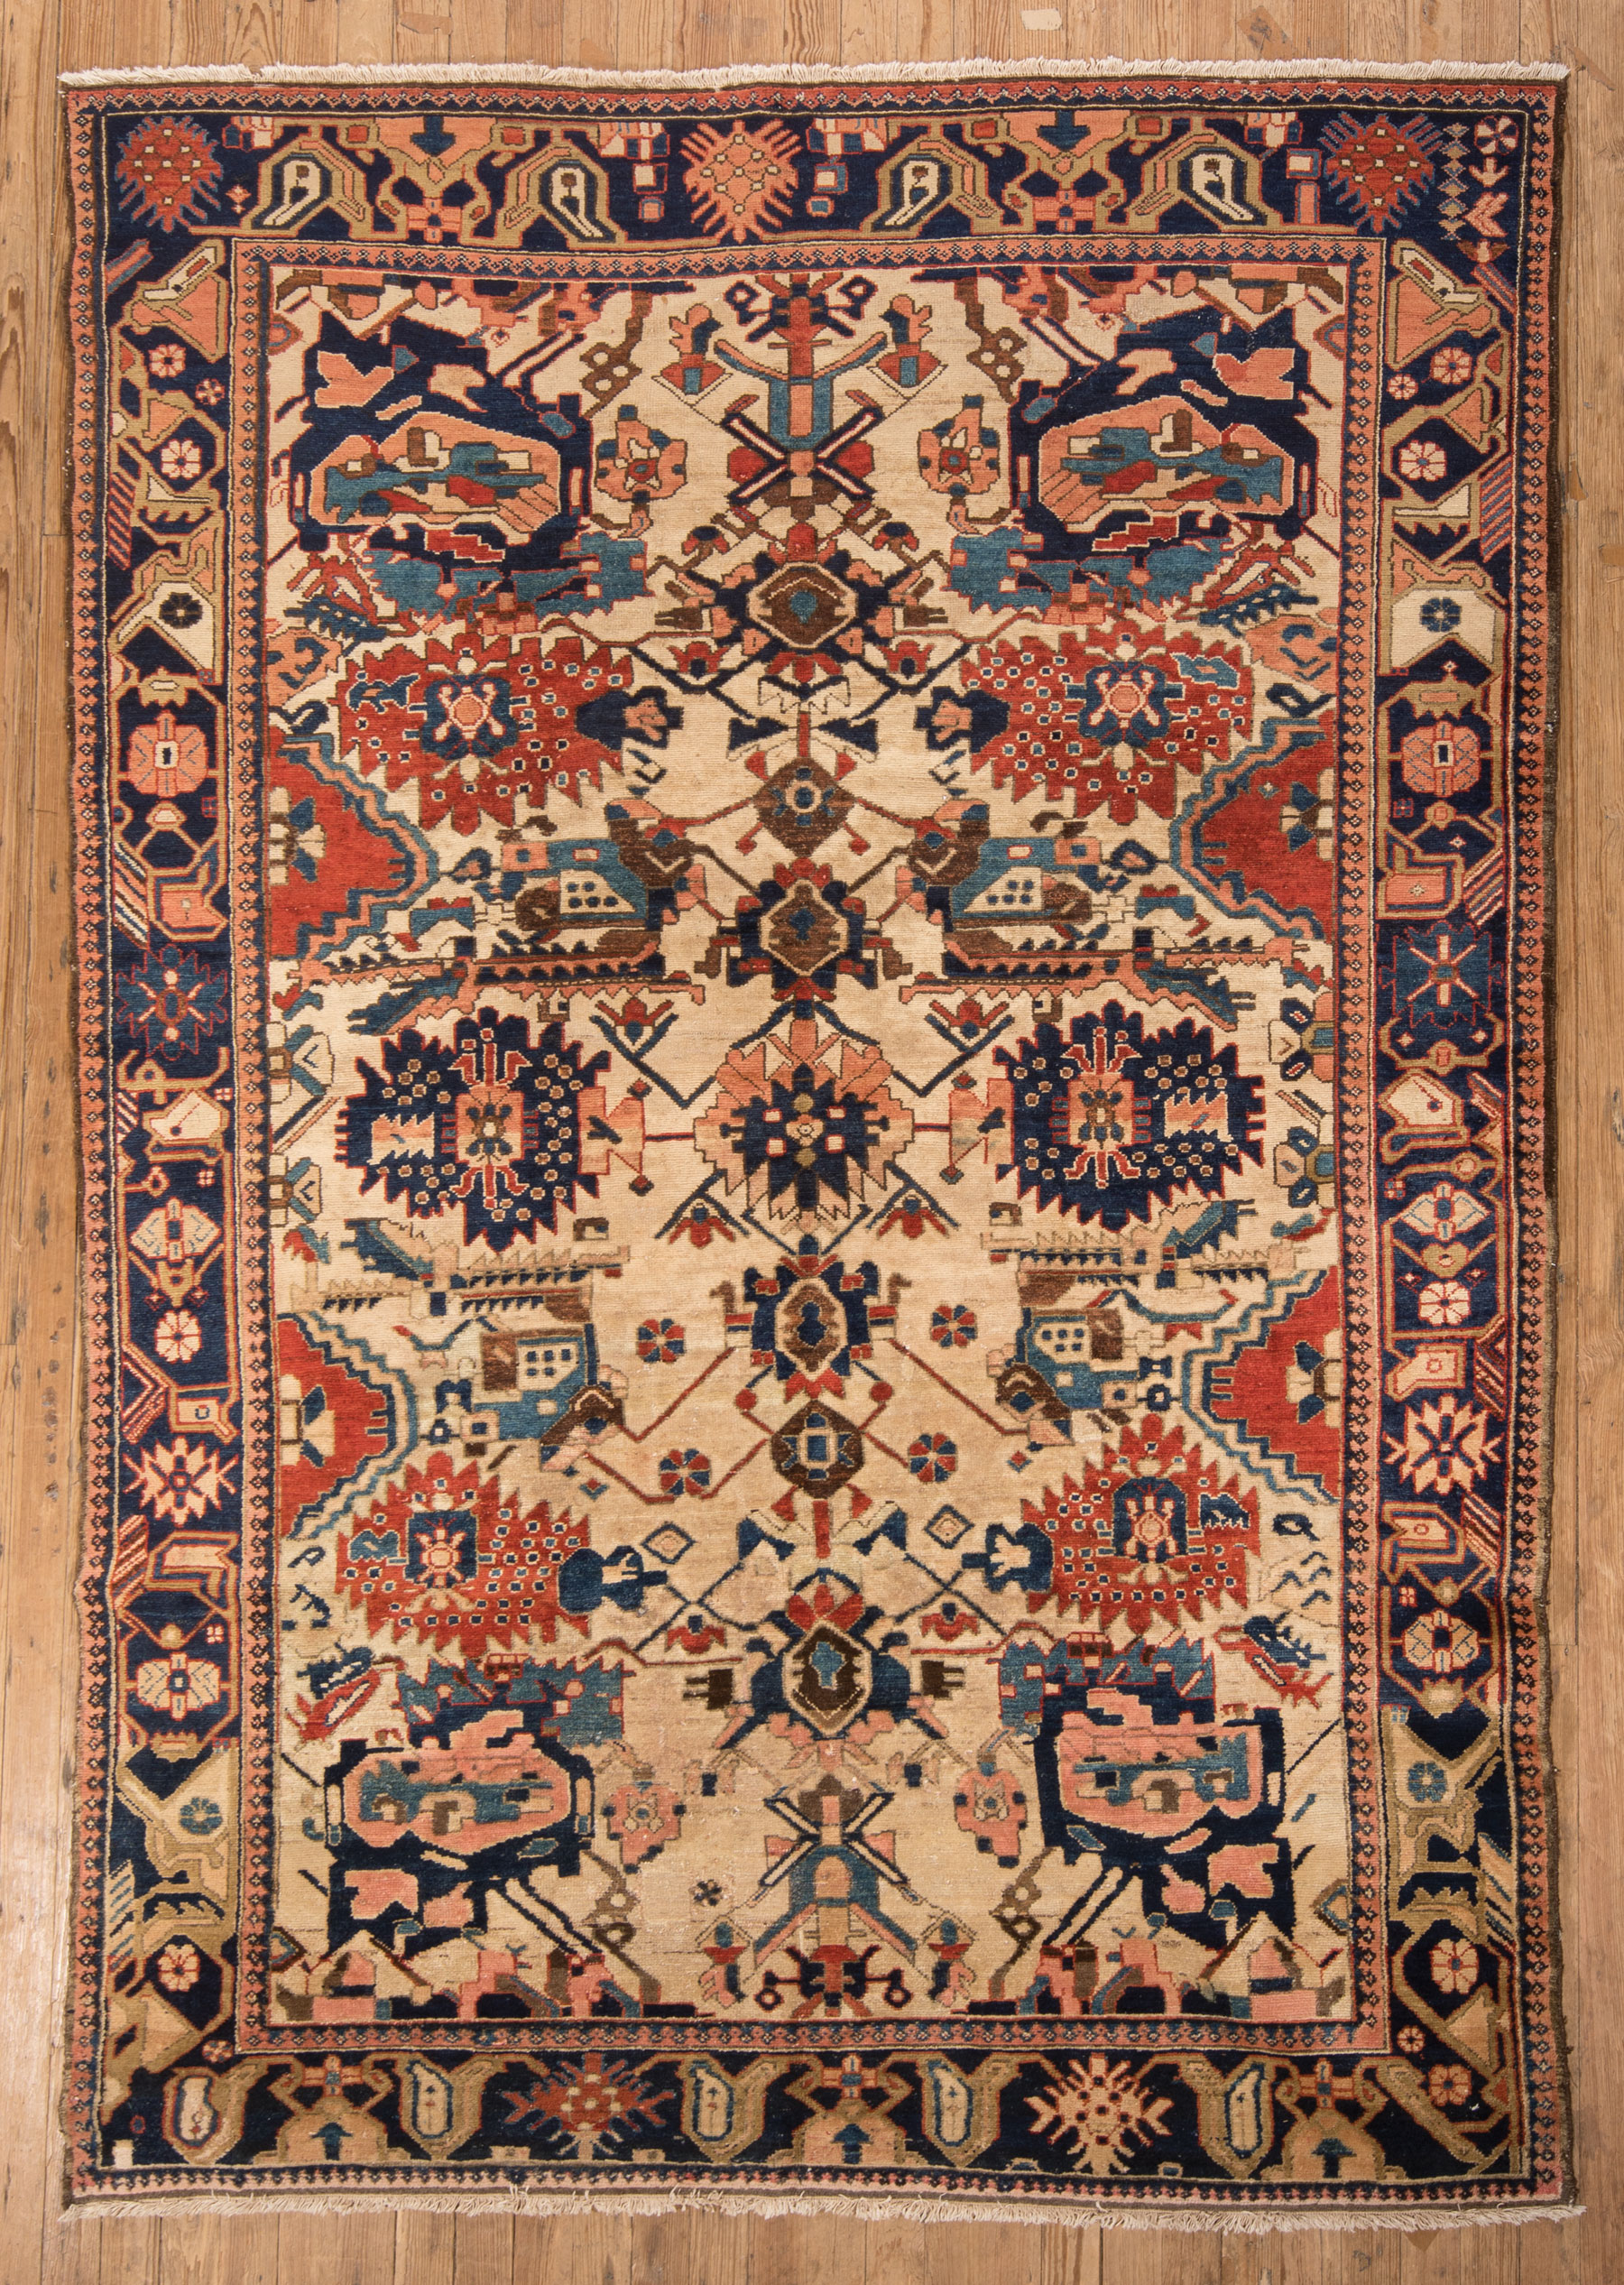 Persian Bactairie Carpet, stylized floral design in reds and blues, 7 ft. 2 in. x 10 ft. 2 in